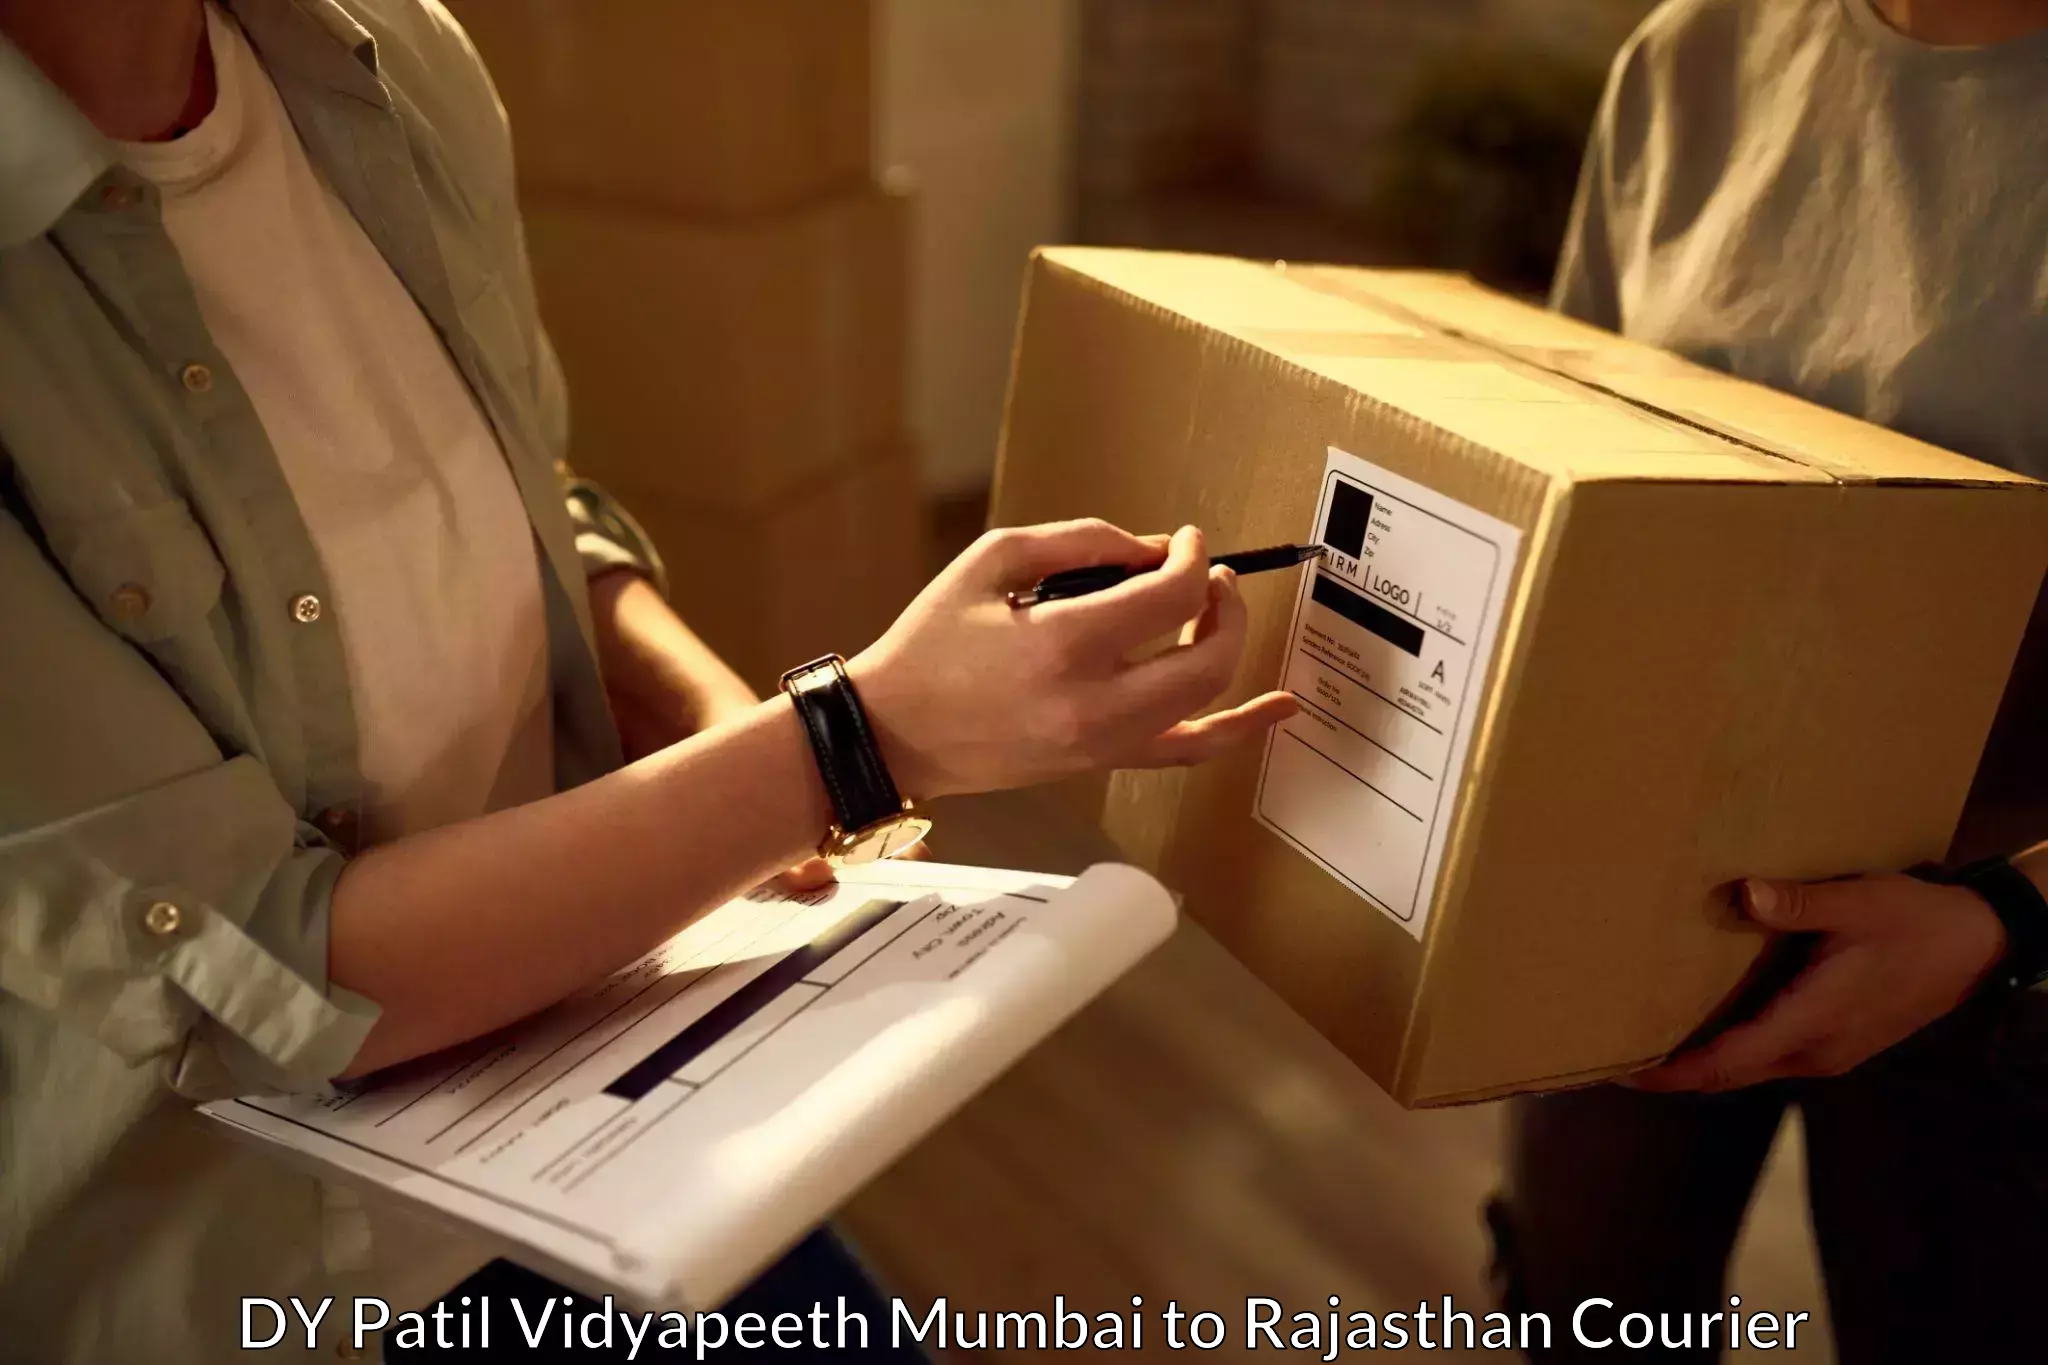 Parcel service for businesses in DY Patil Vidyapeeth Mumbai to Sultana